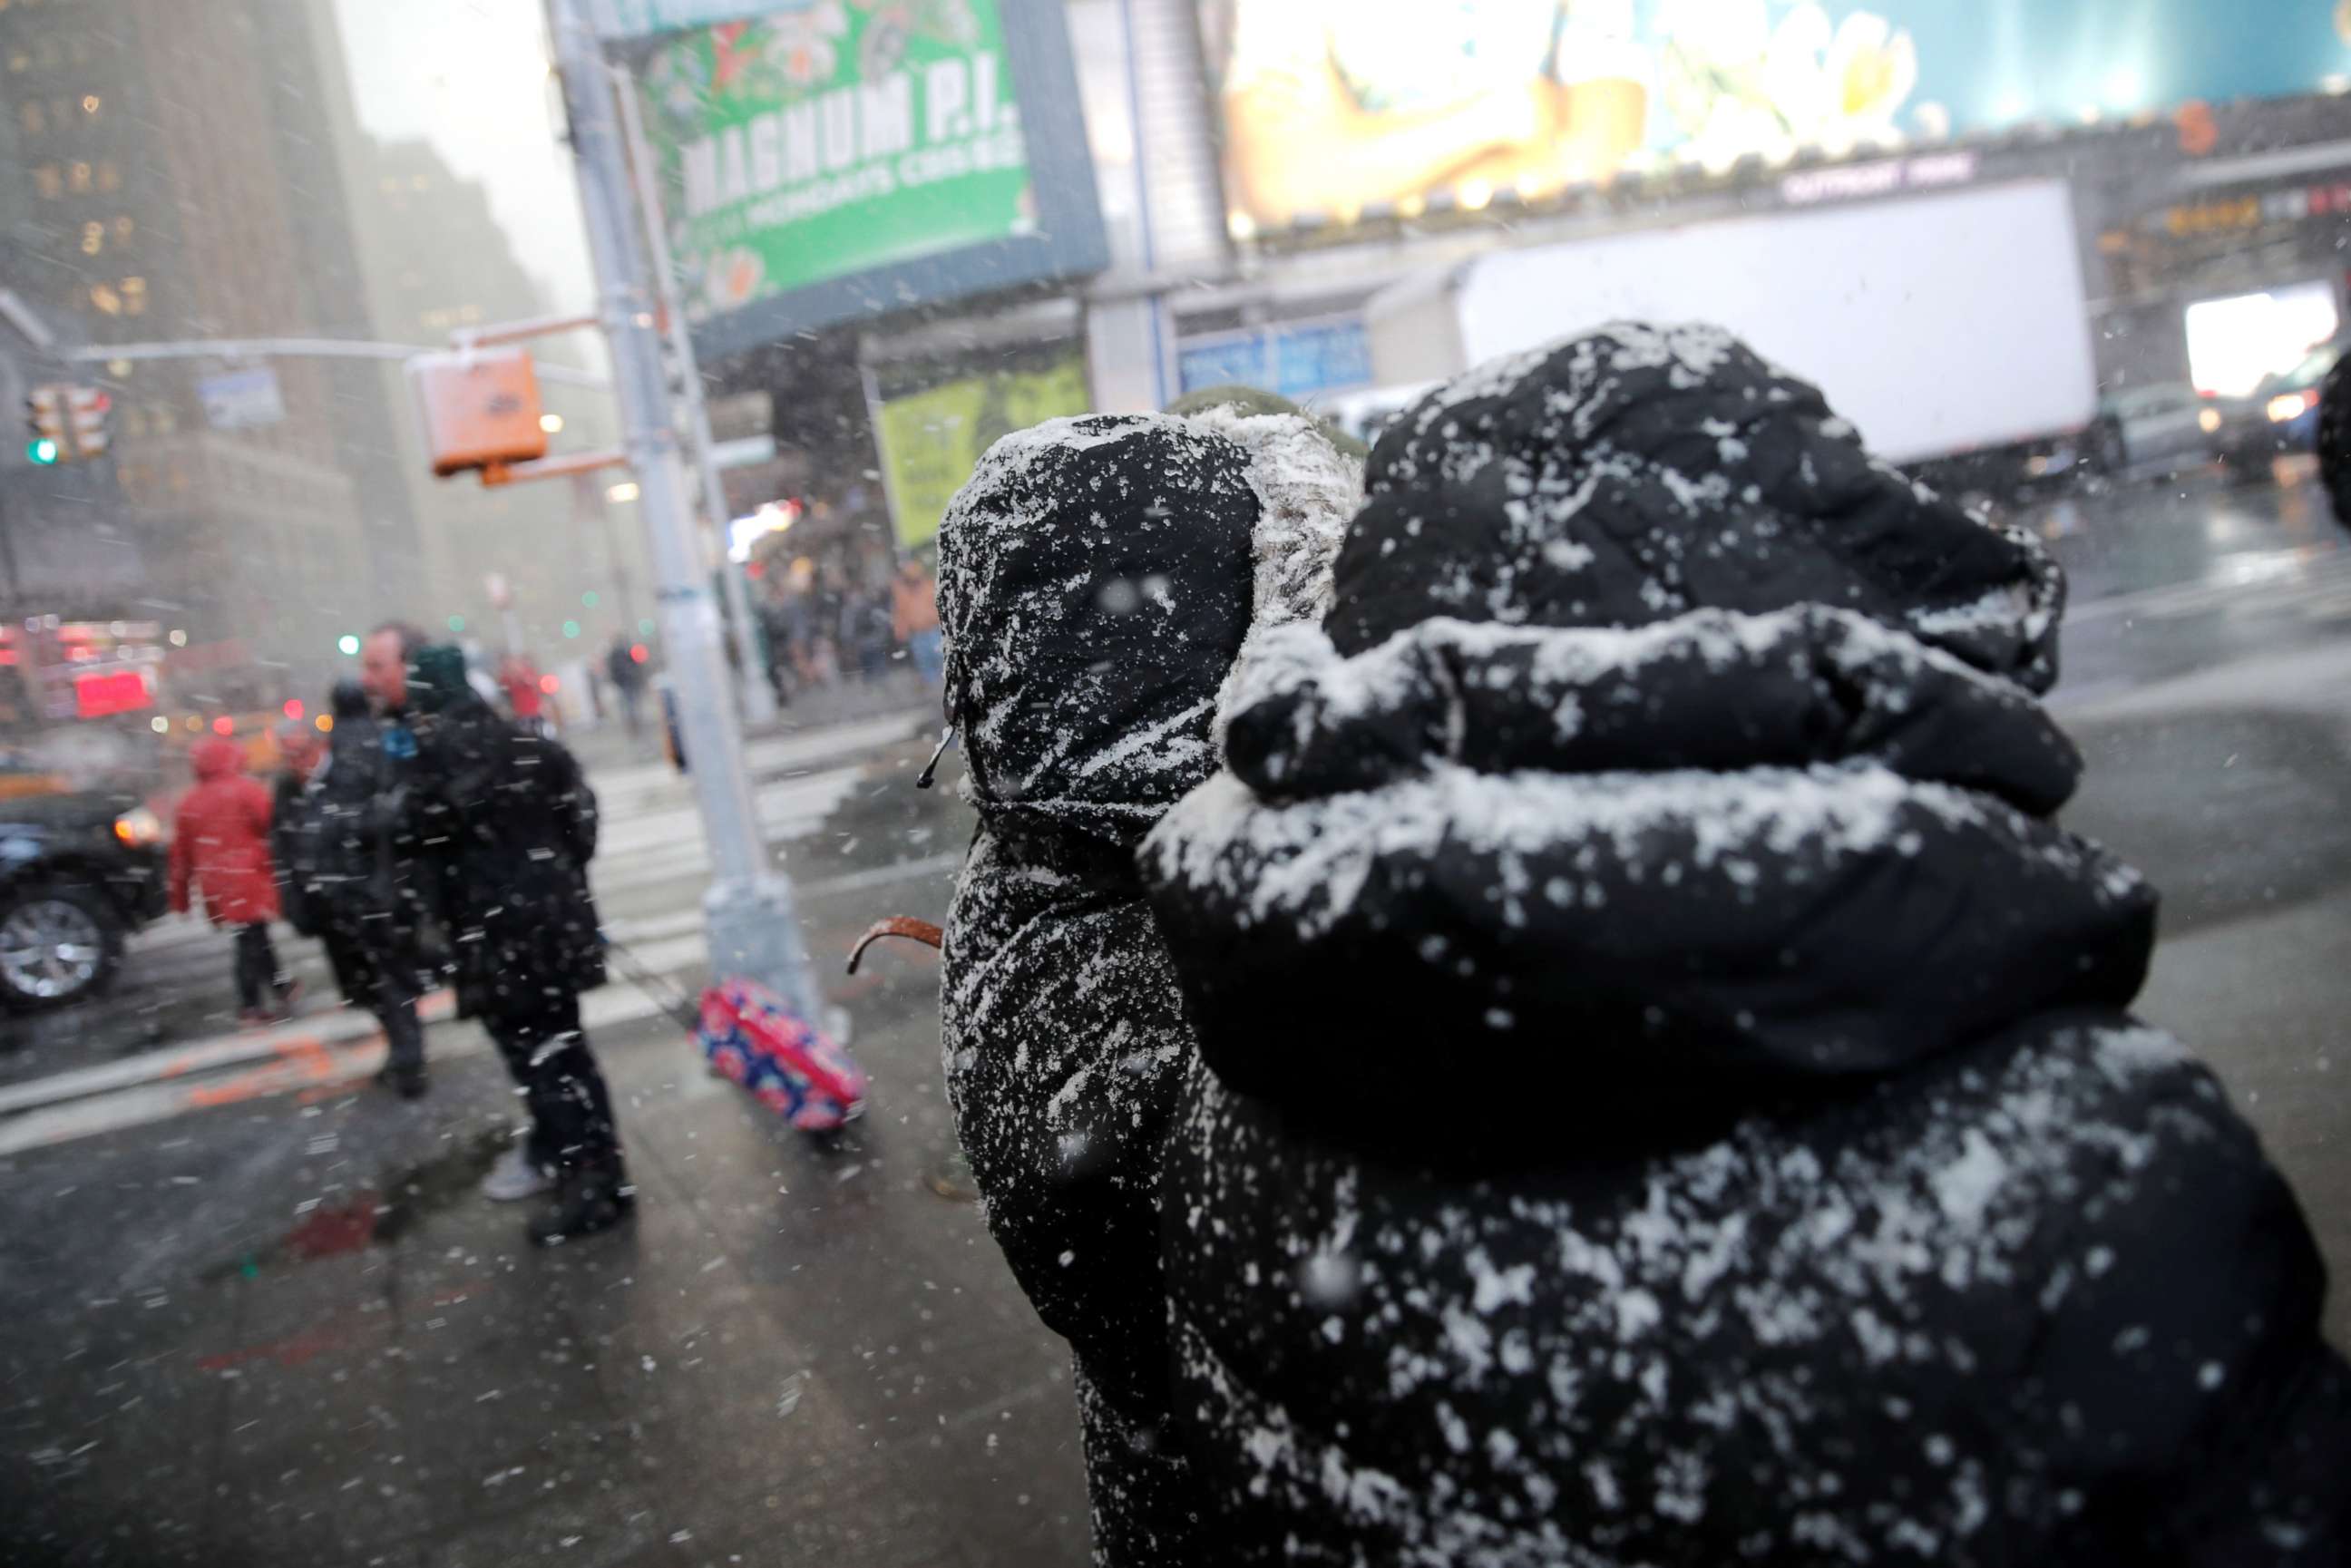 PHOTO: People walk through a snowstorm in Times Square in New York City, Nov. 15, 2018.